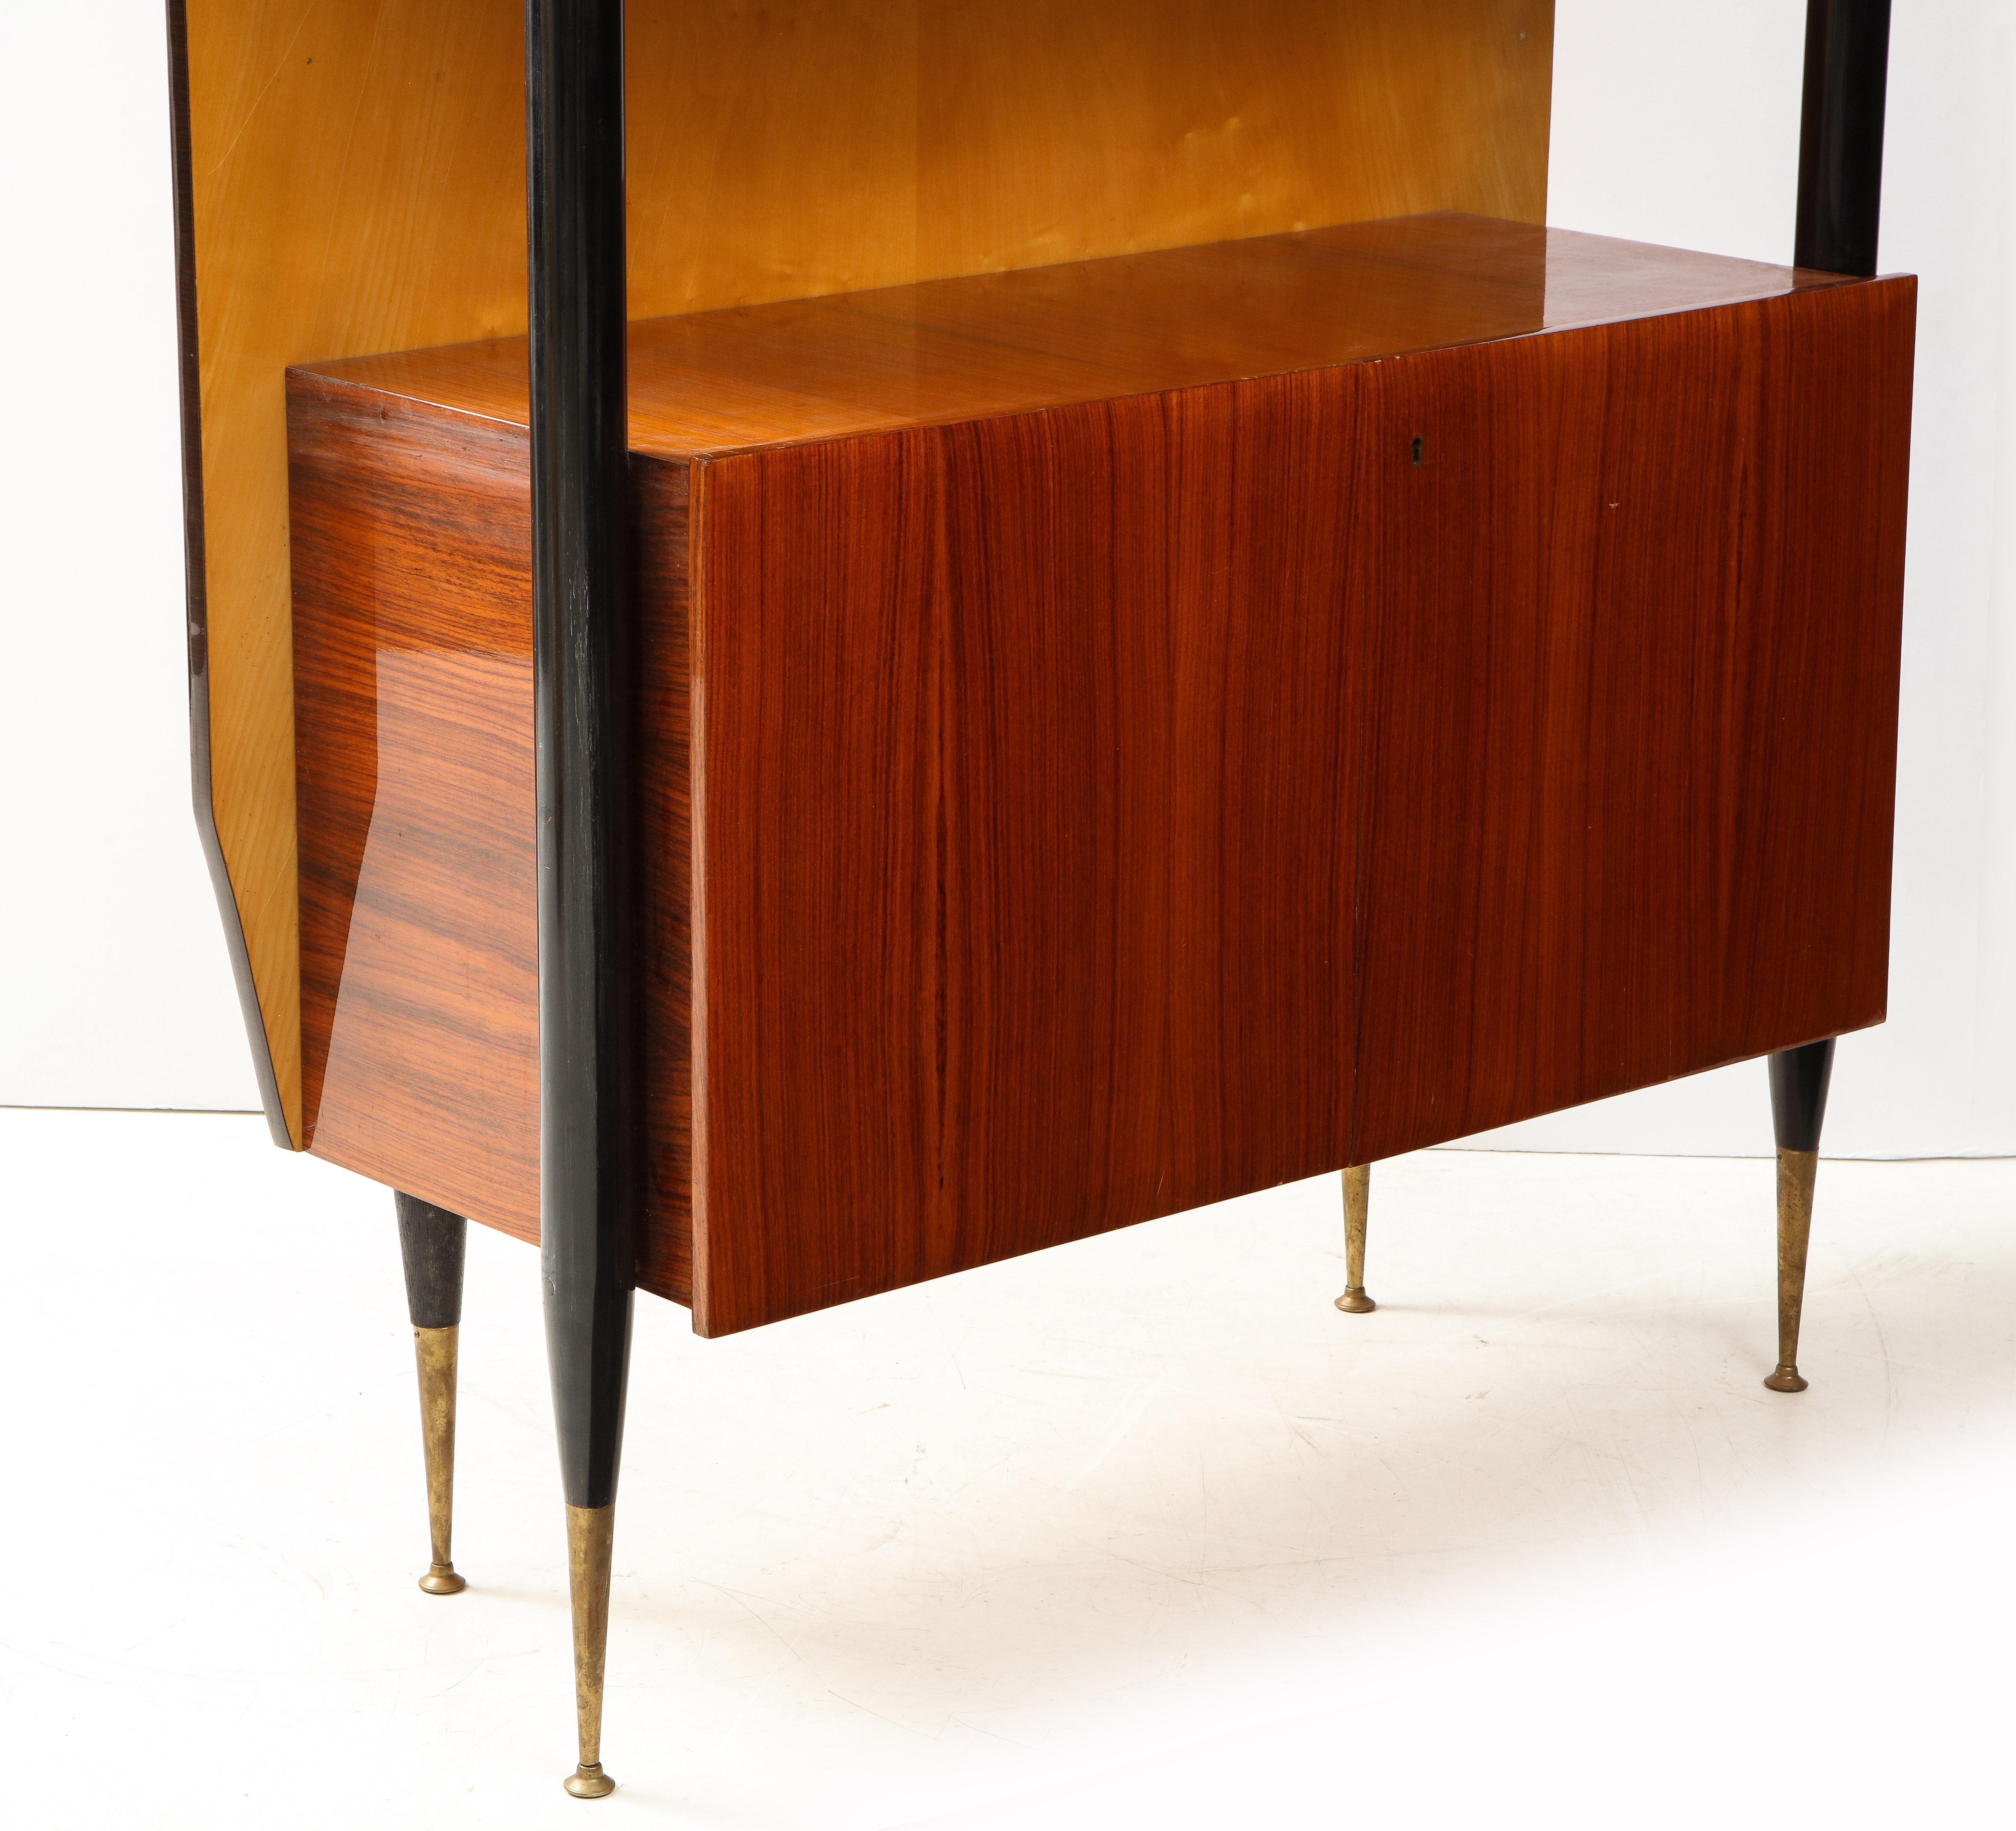 Stylish 1950s Italian Lacquered Mahogany and Sycamore Wall Cabinet For Sale 7